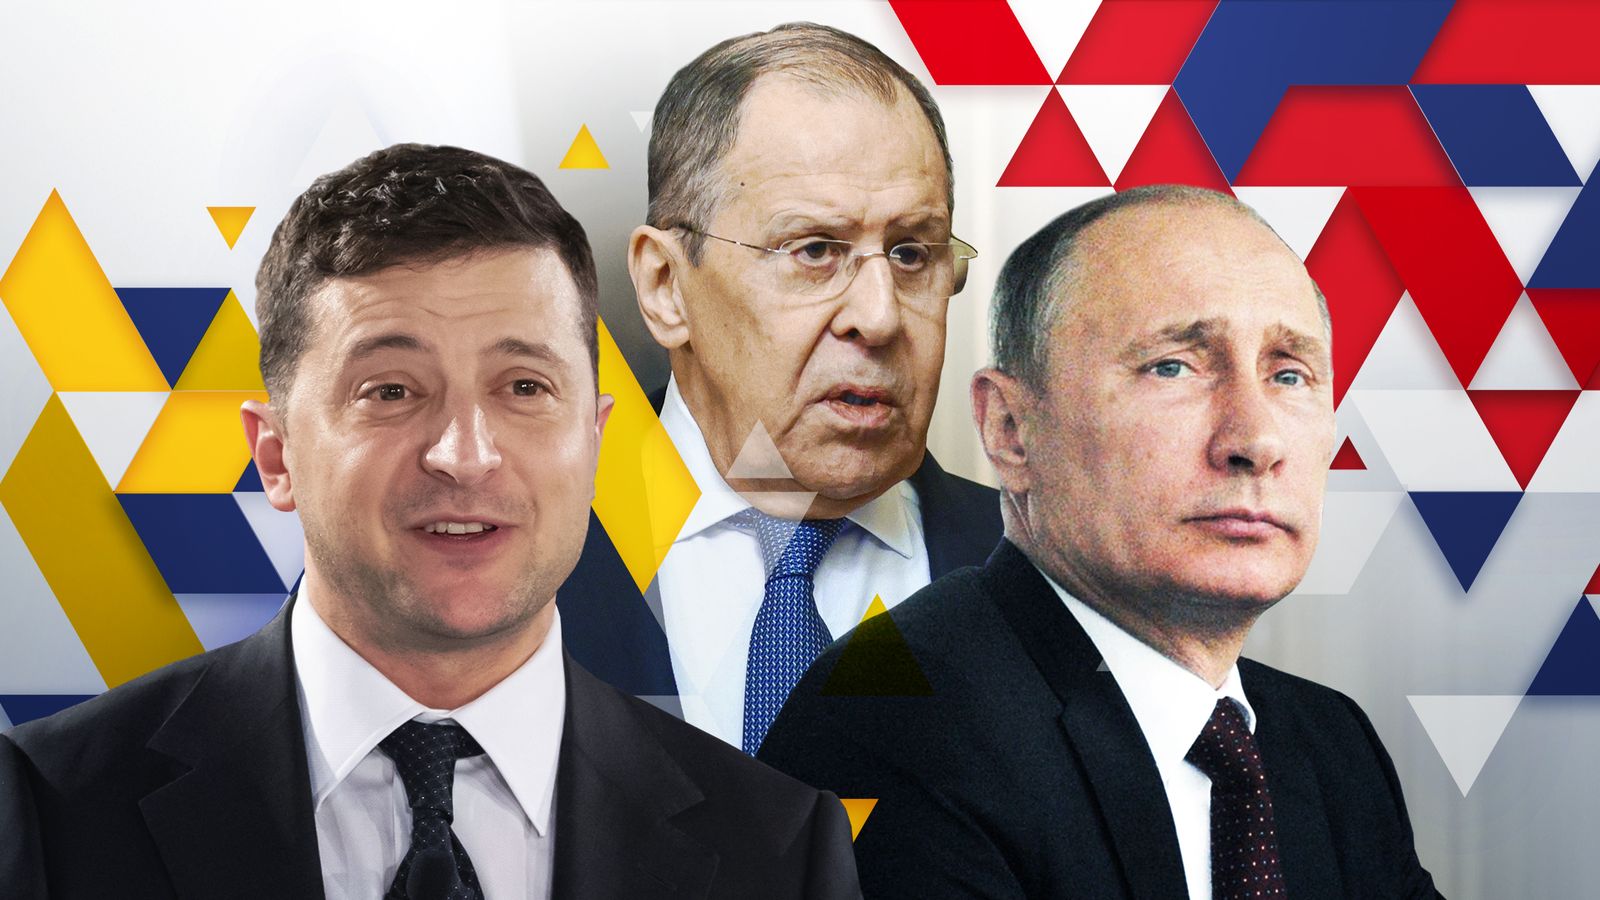 Ukraine-Russia crisis: Who are the key players as war risks breaking out  between Kyiv and the Kremlin? | World News | Sky News